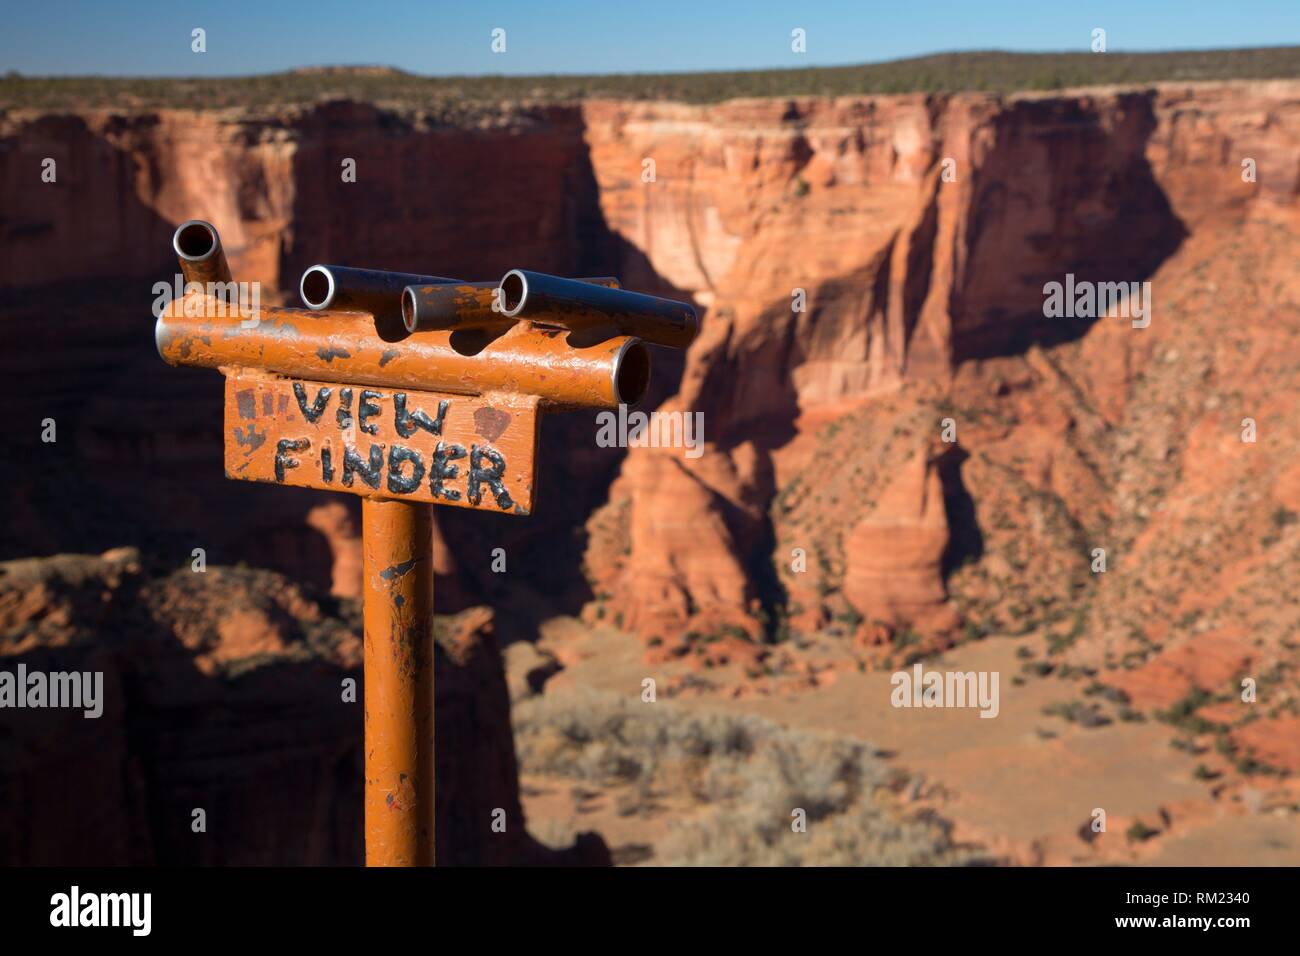 Face Rock Overlook view finder, Canyon de Chelly National Monument, Arizona. Stock Photo